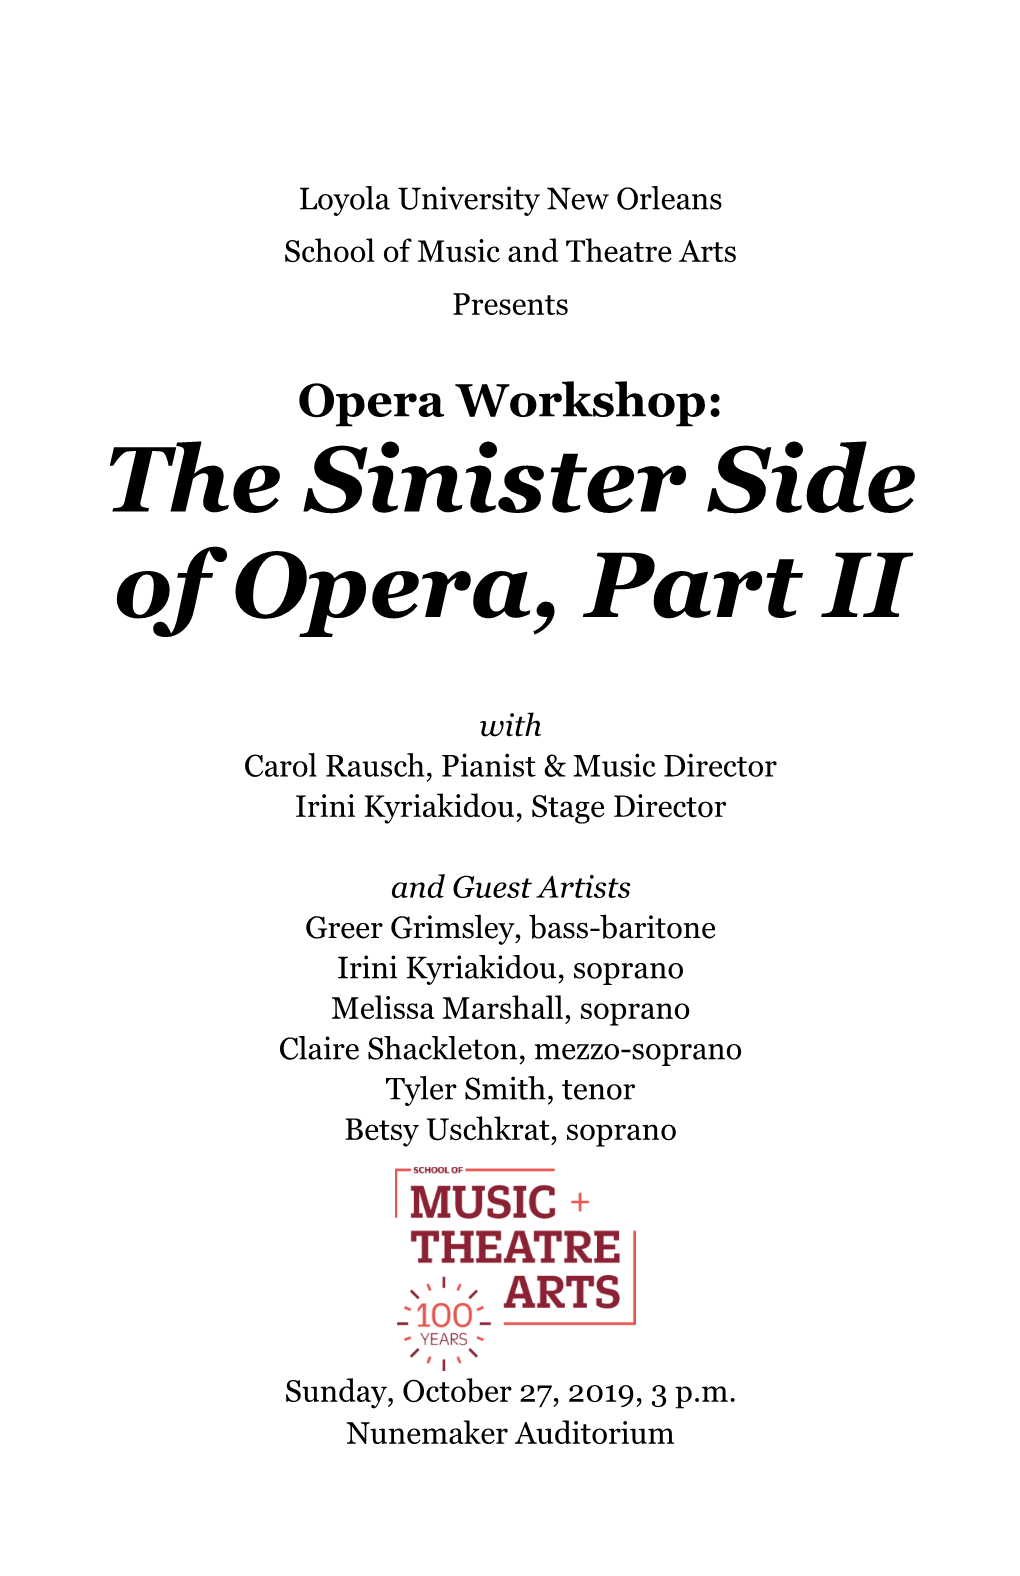 The Sinister Side of Opera, Part II